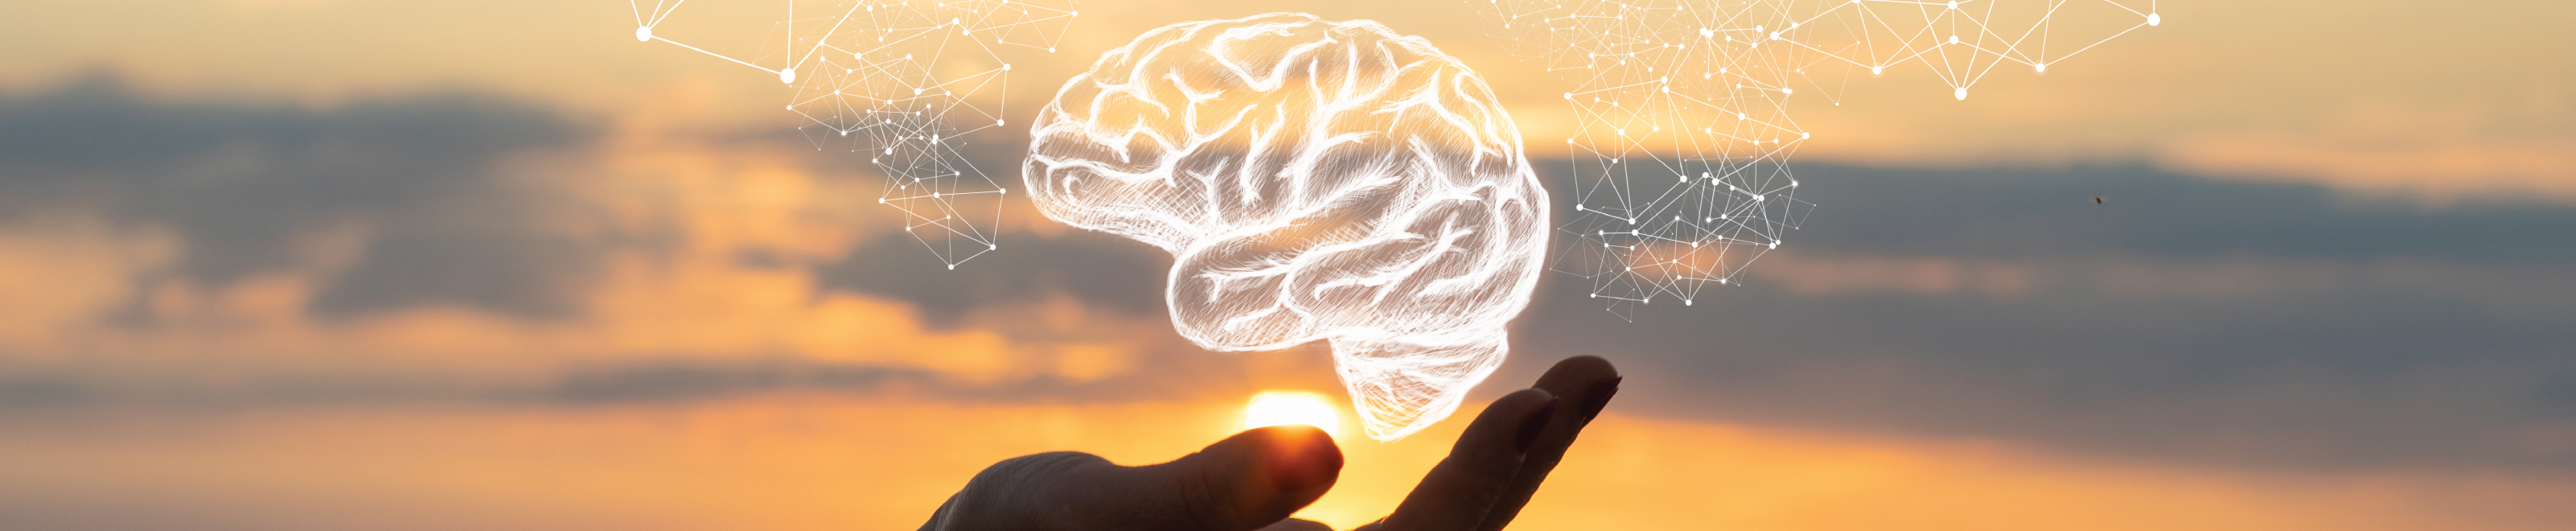 A hand holding an illustration of a brain with a sunset in the background.